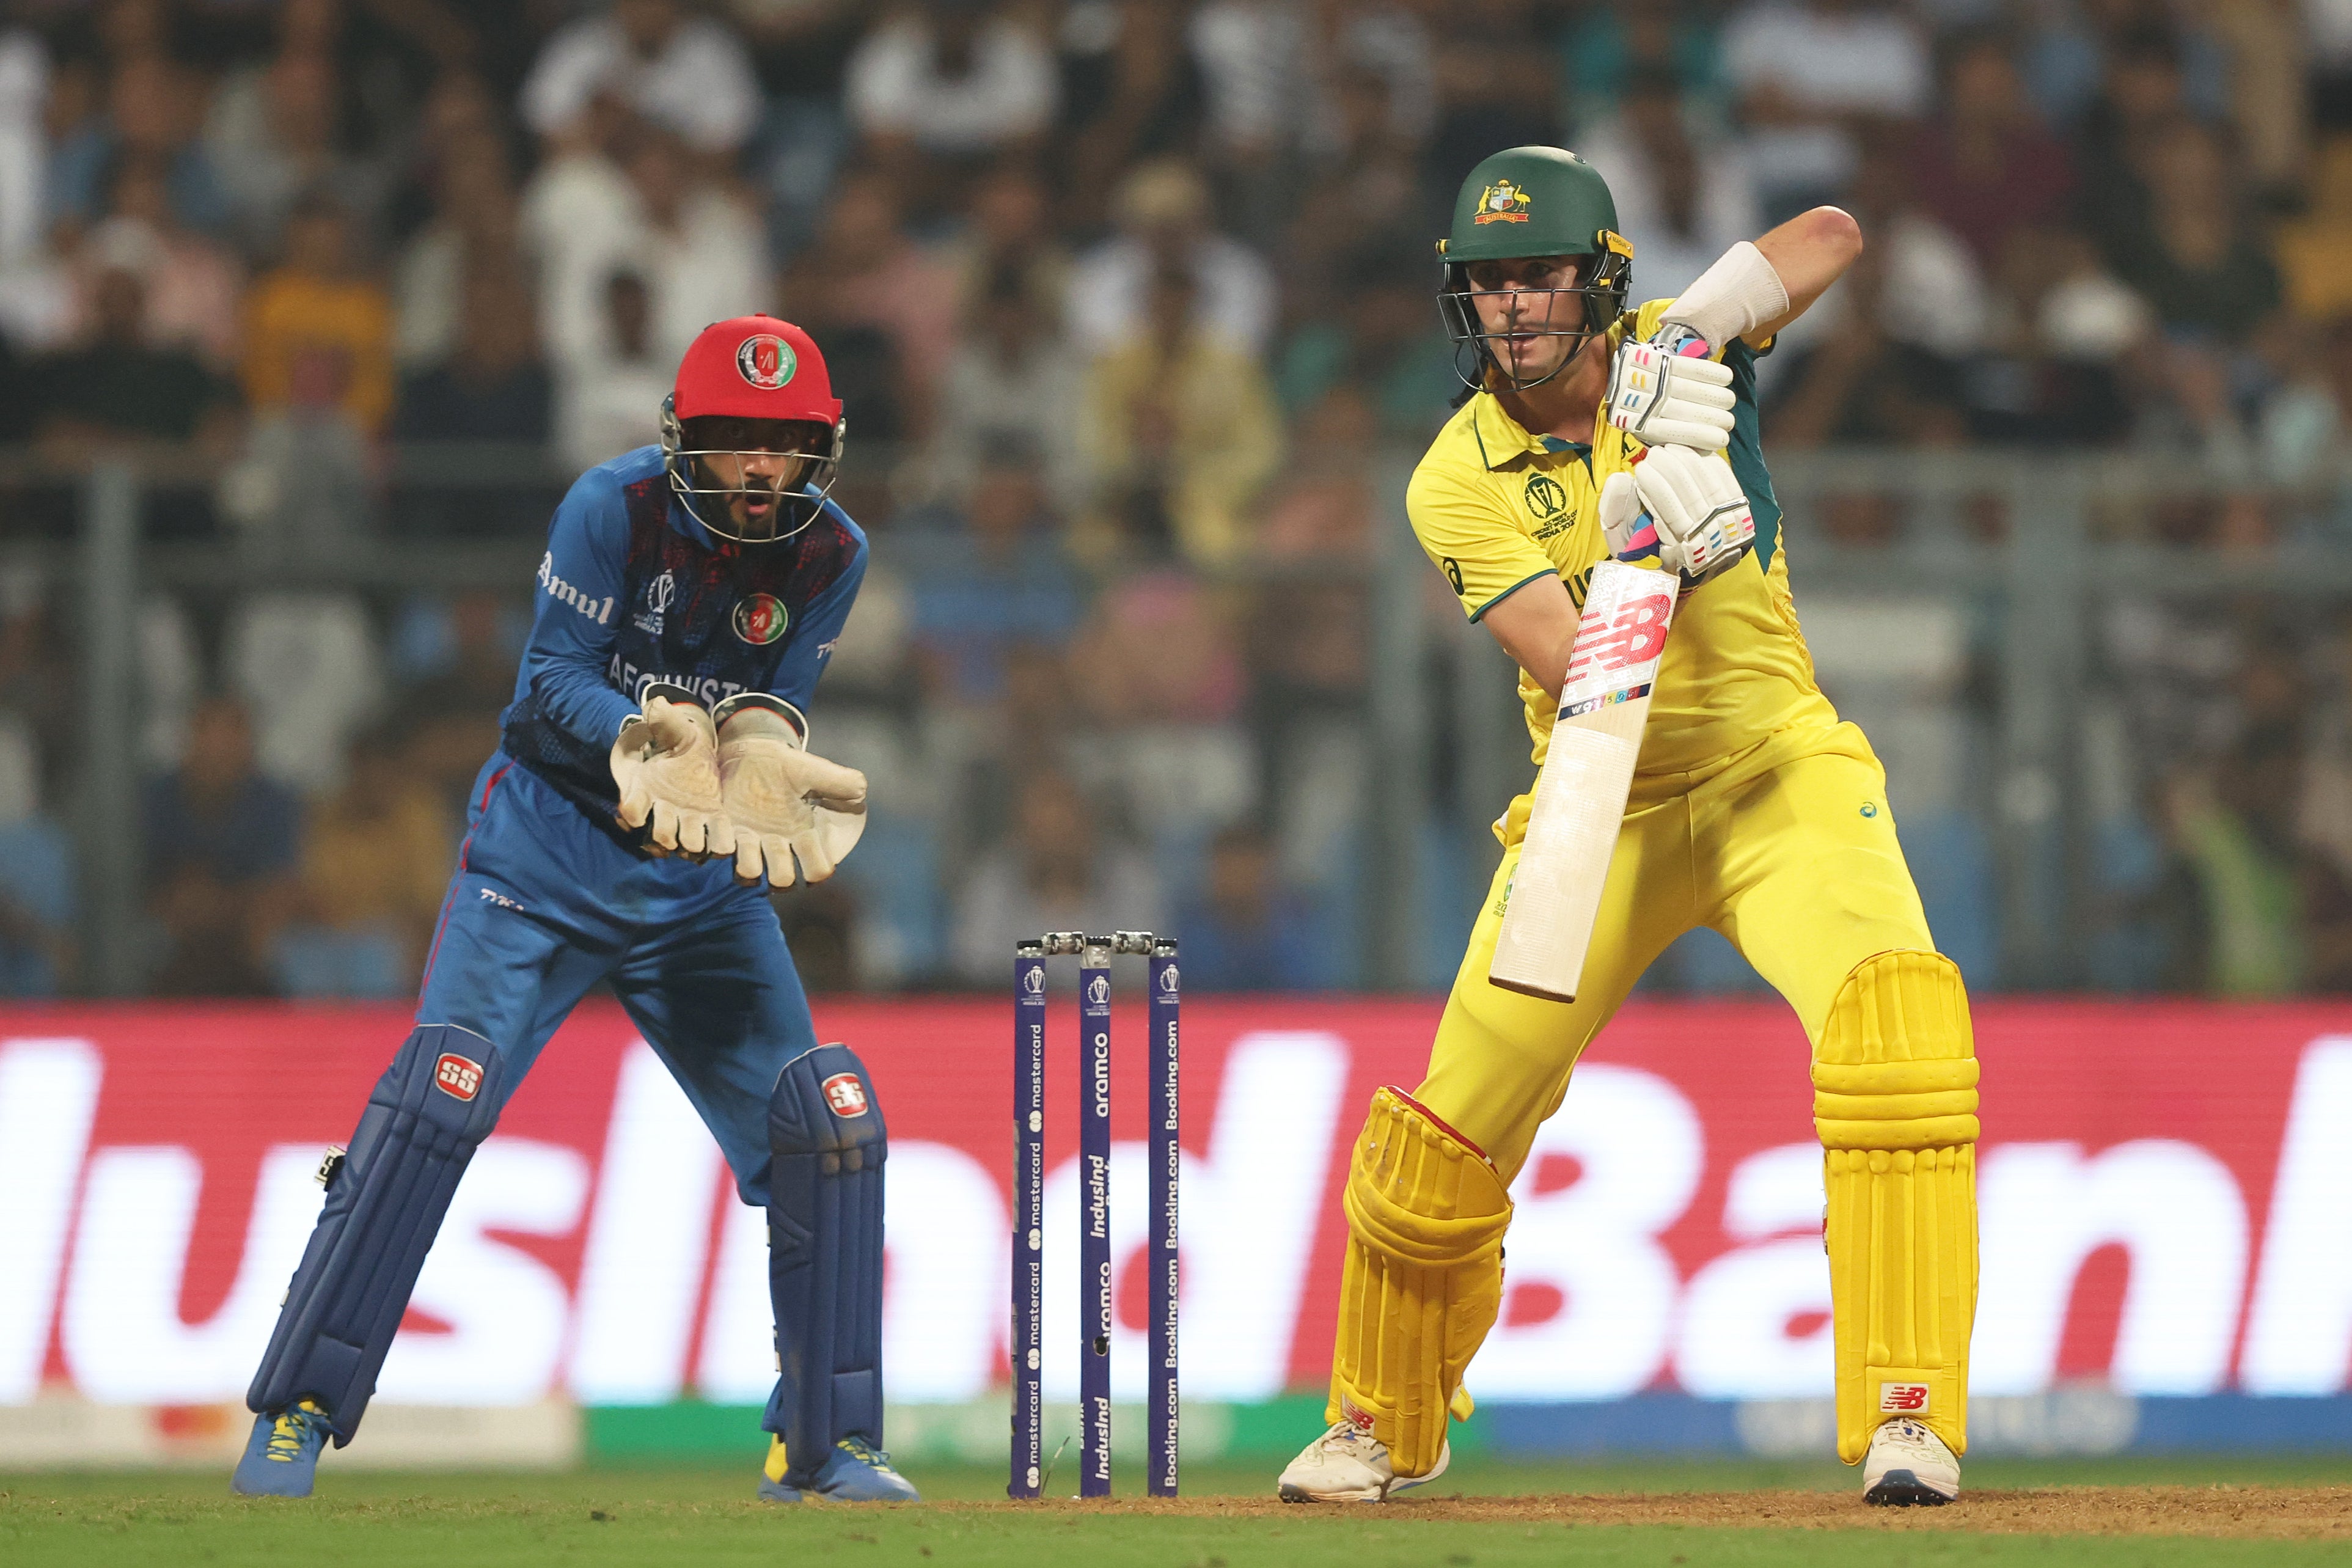 Australia were due to take on Afghanistan later this year